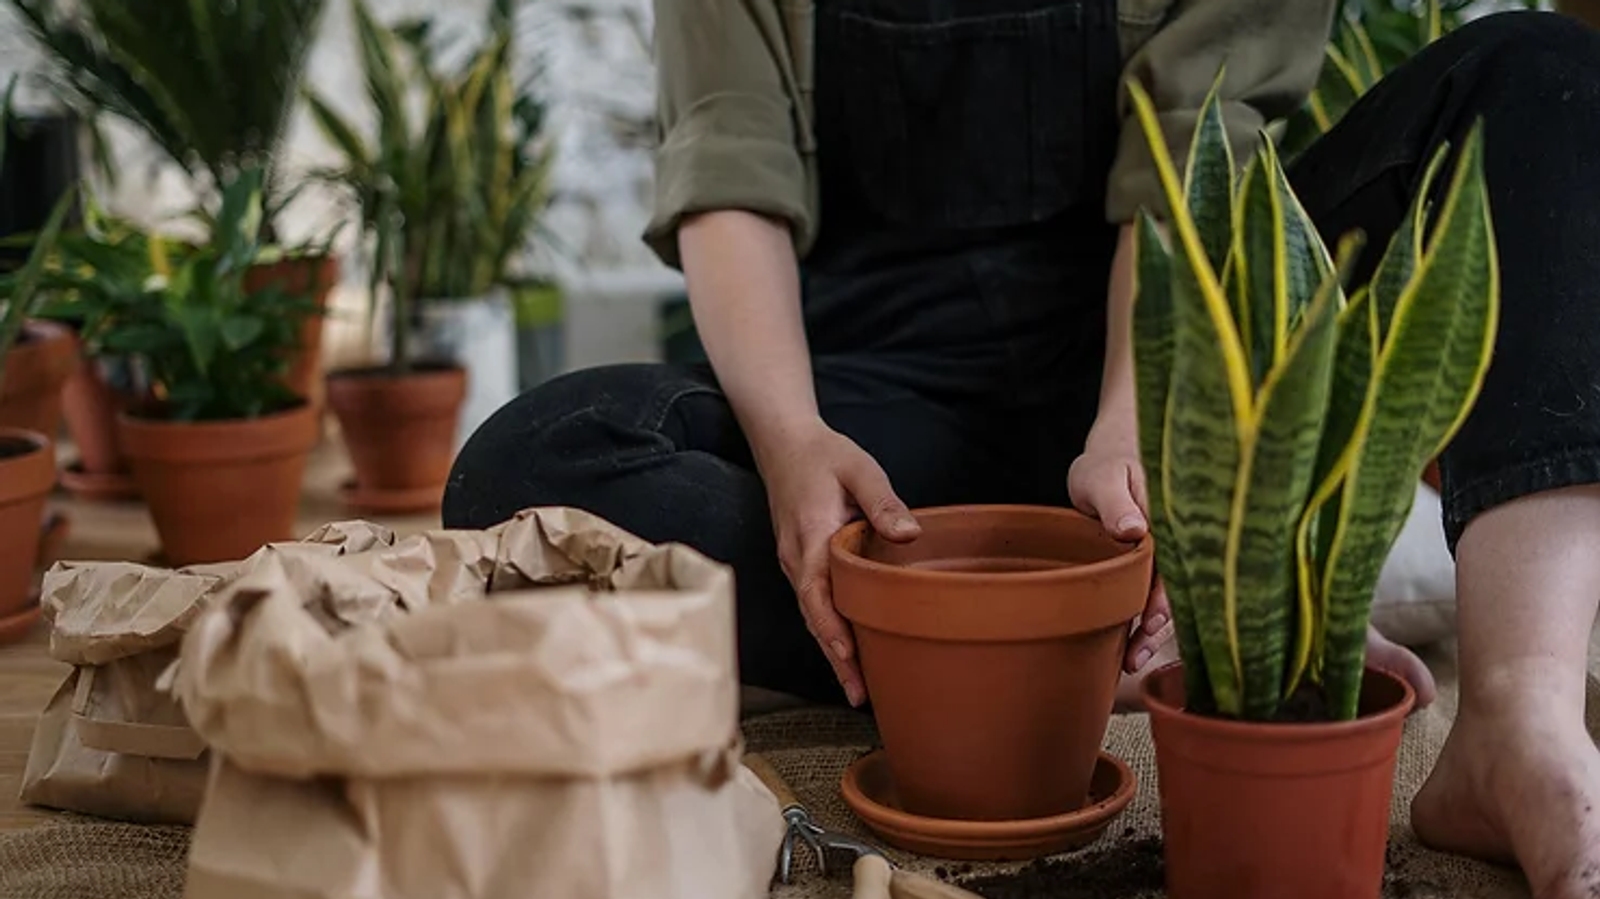 someone sitting and potting plants with soil in terracotta pots